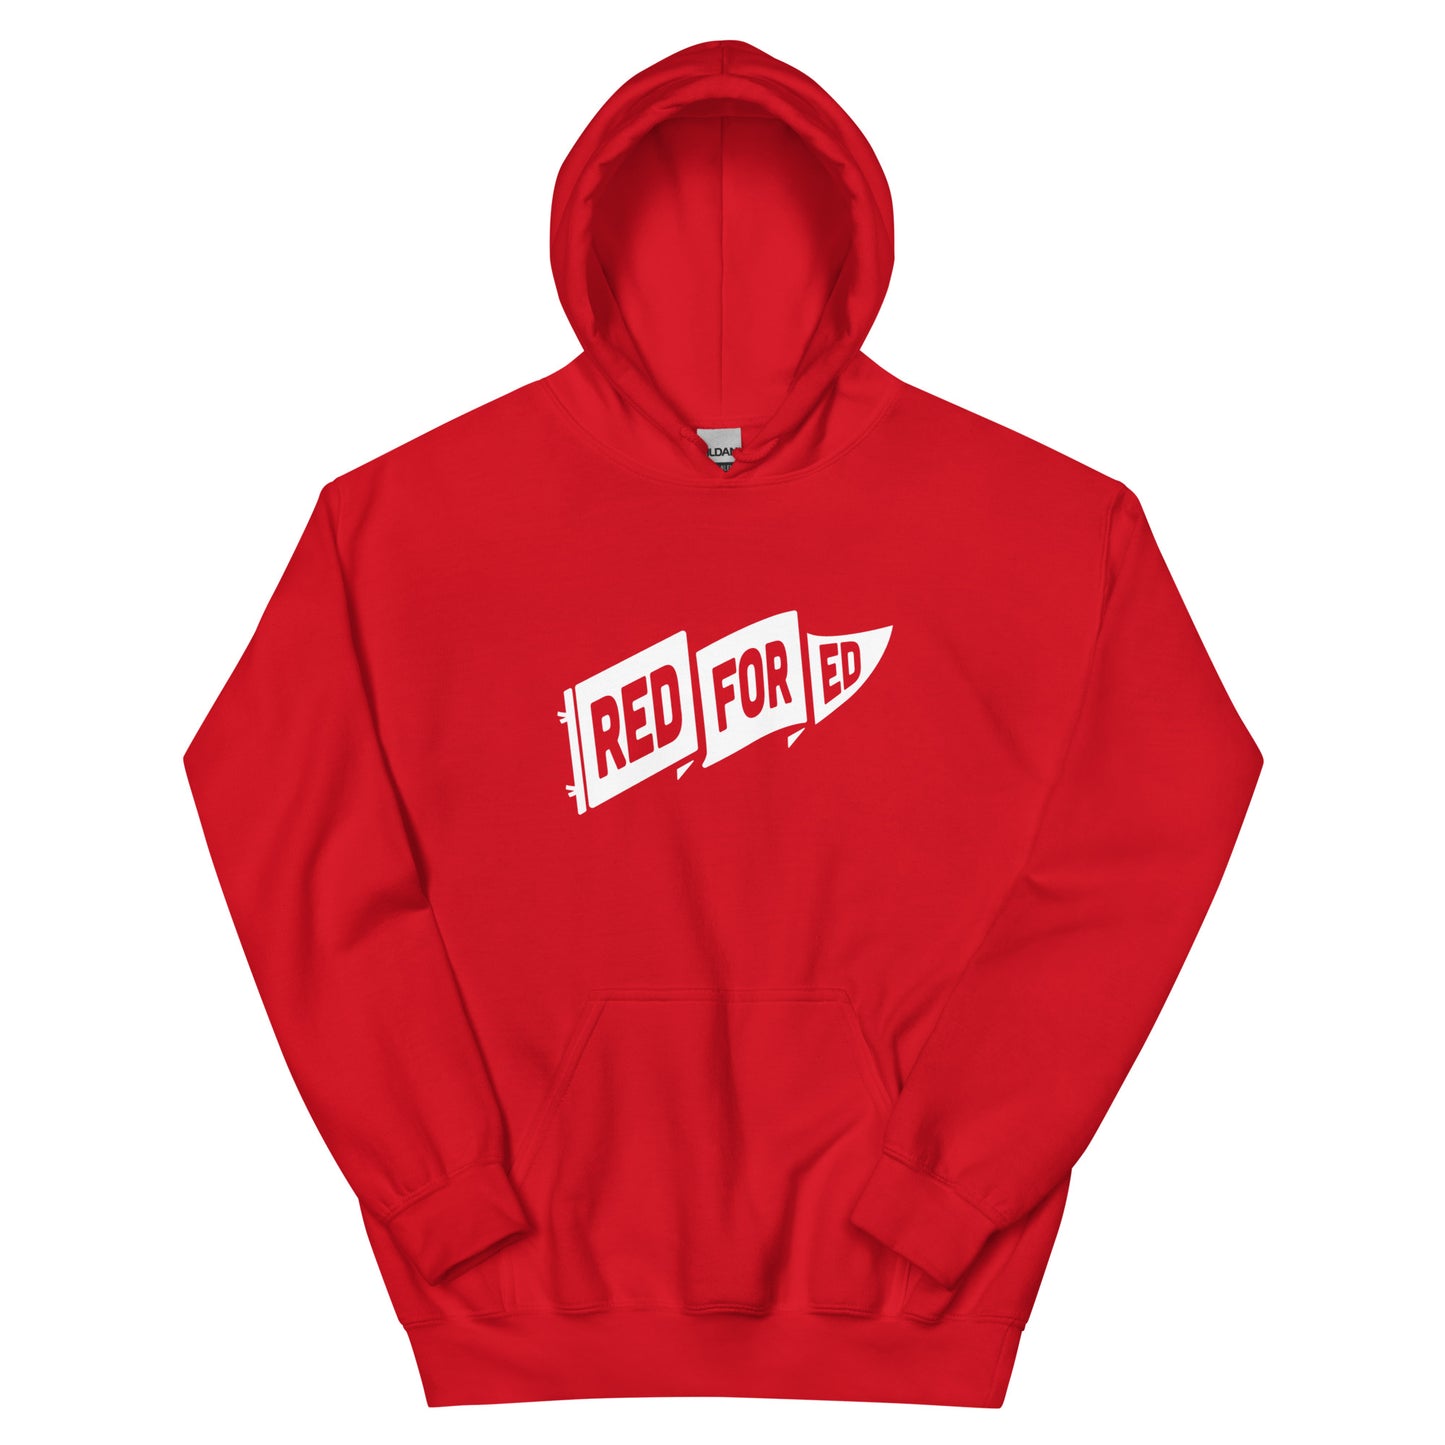 Red For Ed - Pennant Unisex Hoodie